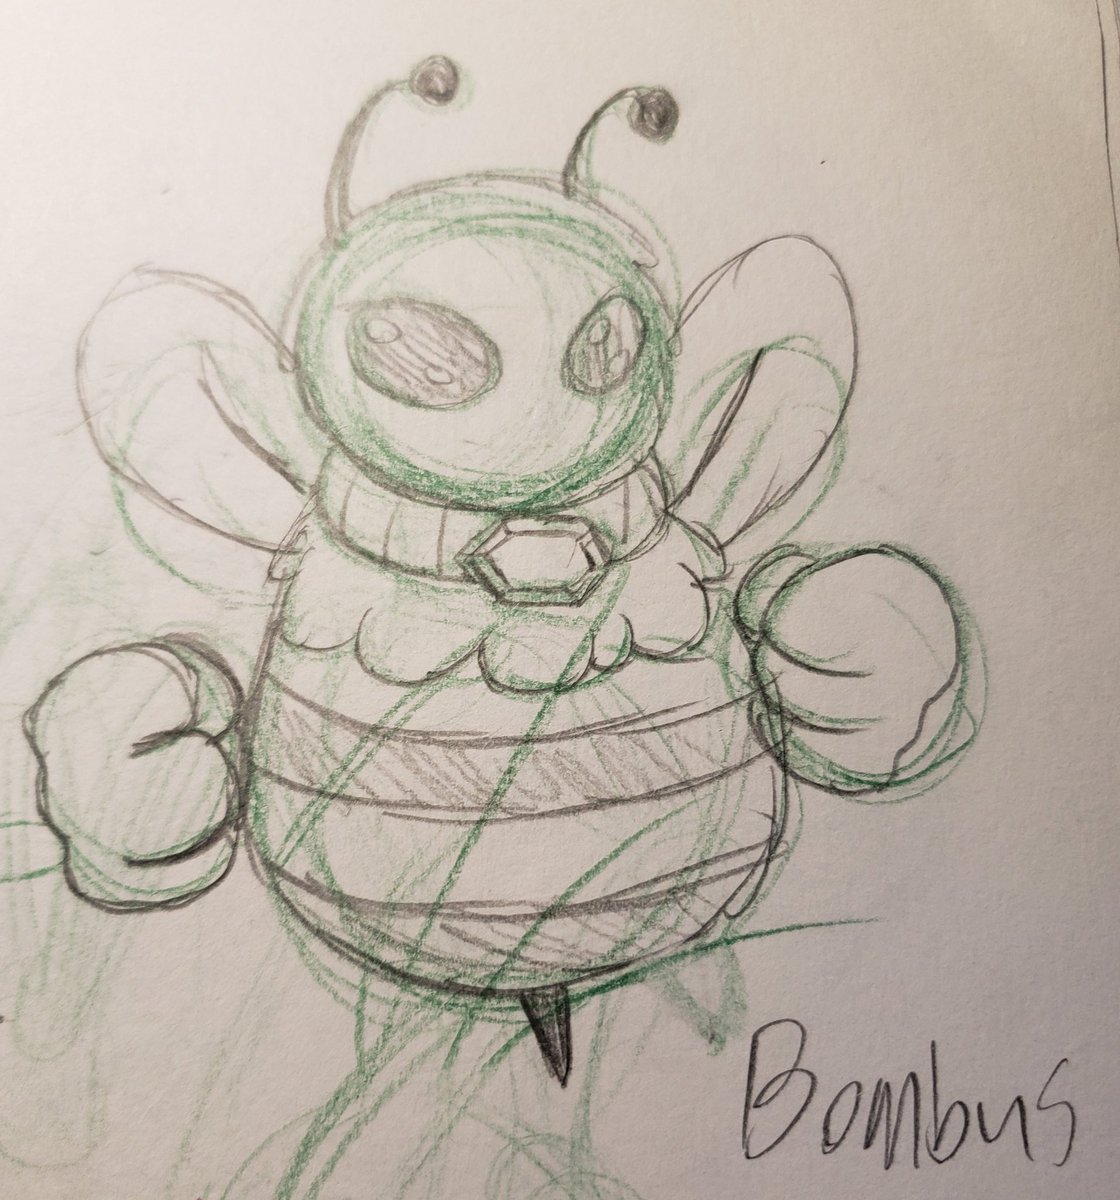 8. To stay on Ayla a bit more, her intial OC design was "Apis". You can see she was more of a human. Bombus was also another that came from the Emoji OC Suggestion stuff

Eventually, Apis became Ayla, and Bombus became Bumblebeast (his name is still Bombus) 